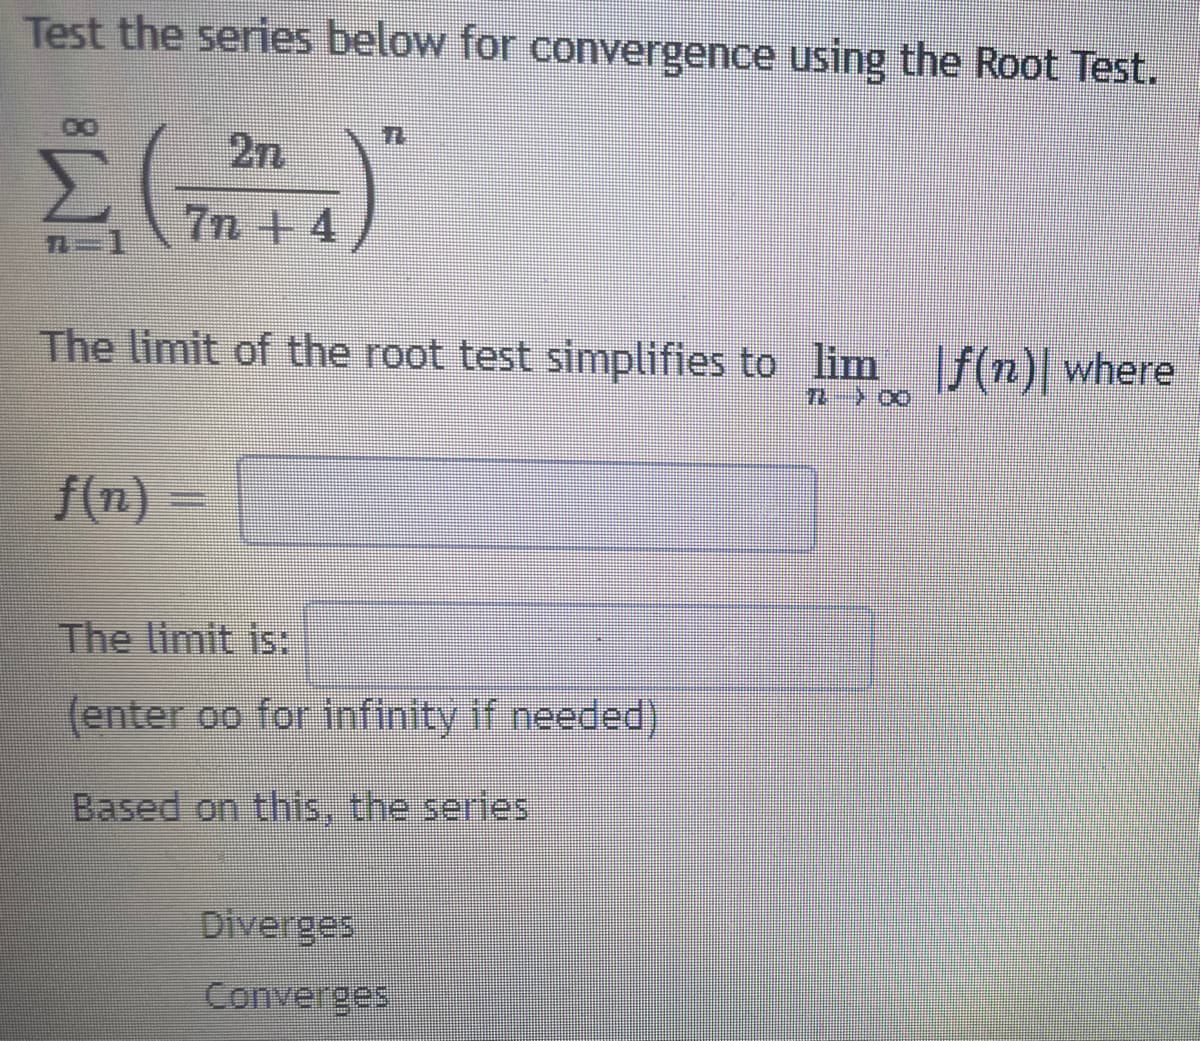 Test the series below for convergence using the Root Test.
2n
7n +4
The limit of the root test simplifies to lim f(n)| where
f(n)
) -
The limit is:
(enter oo for infinity if needed)
Based on this, the series
Diverges
Converges
